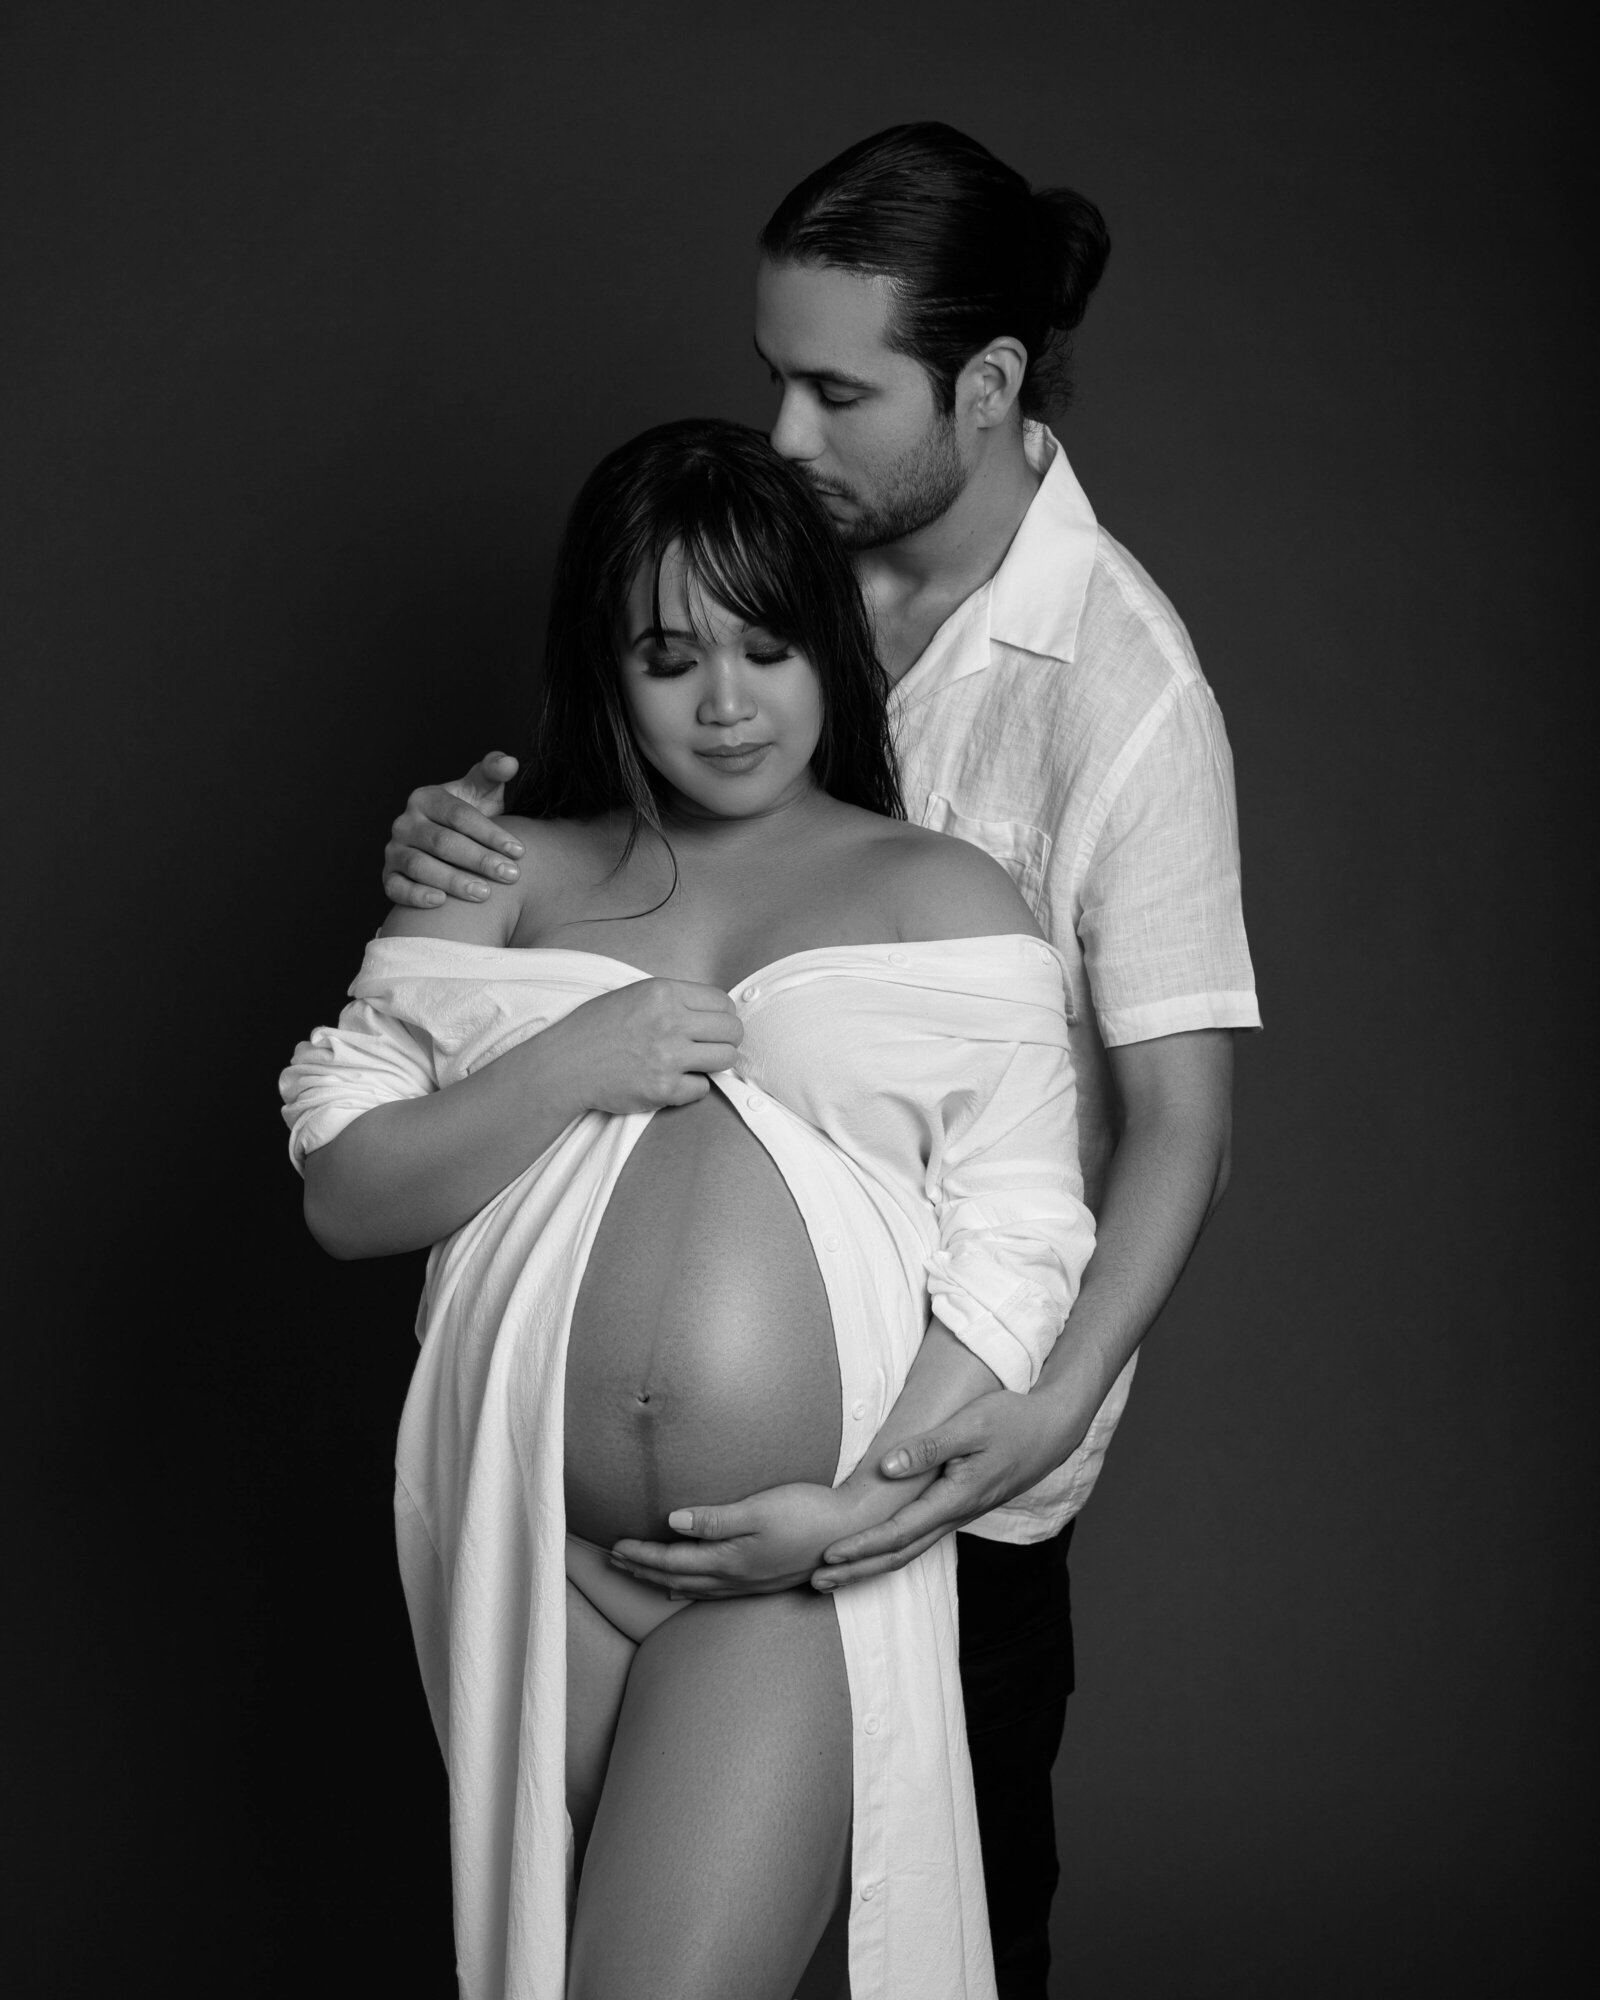 couple-maternity-photodhoot-by-daisy-rey-in-new-jersey-studio